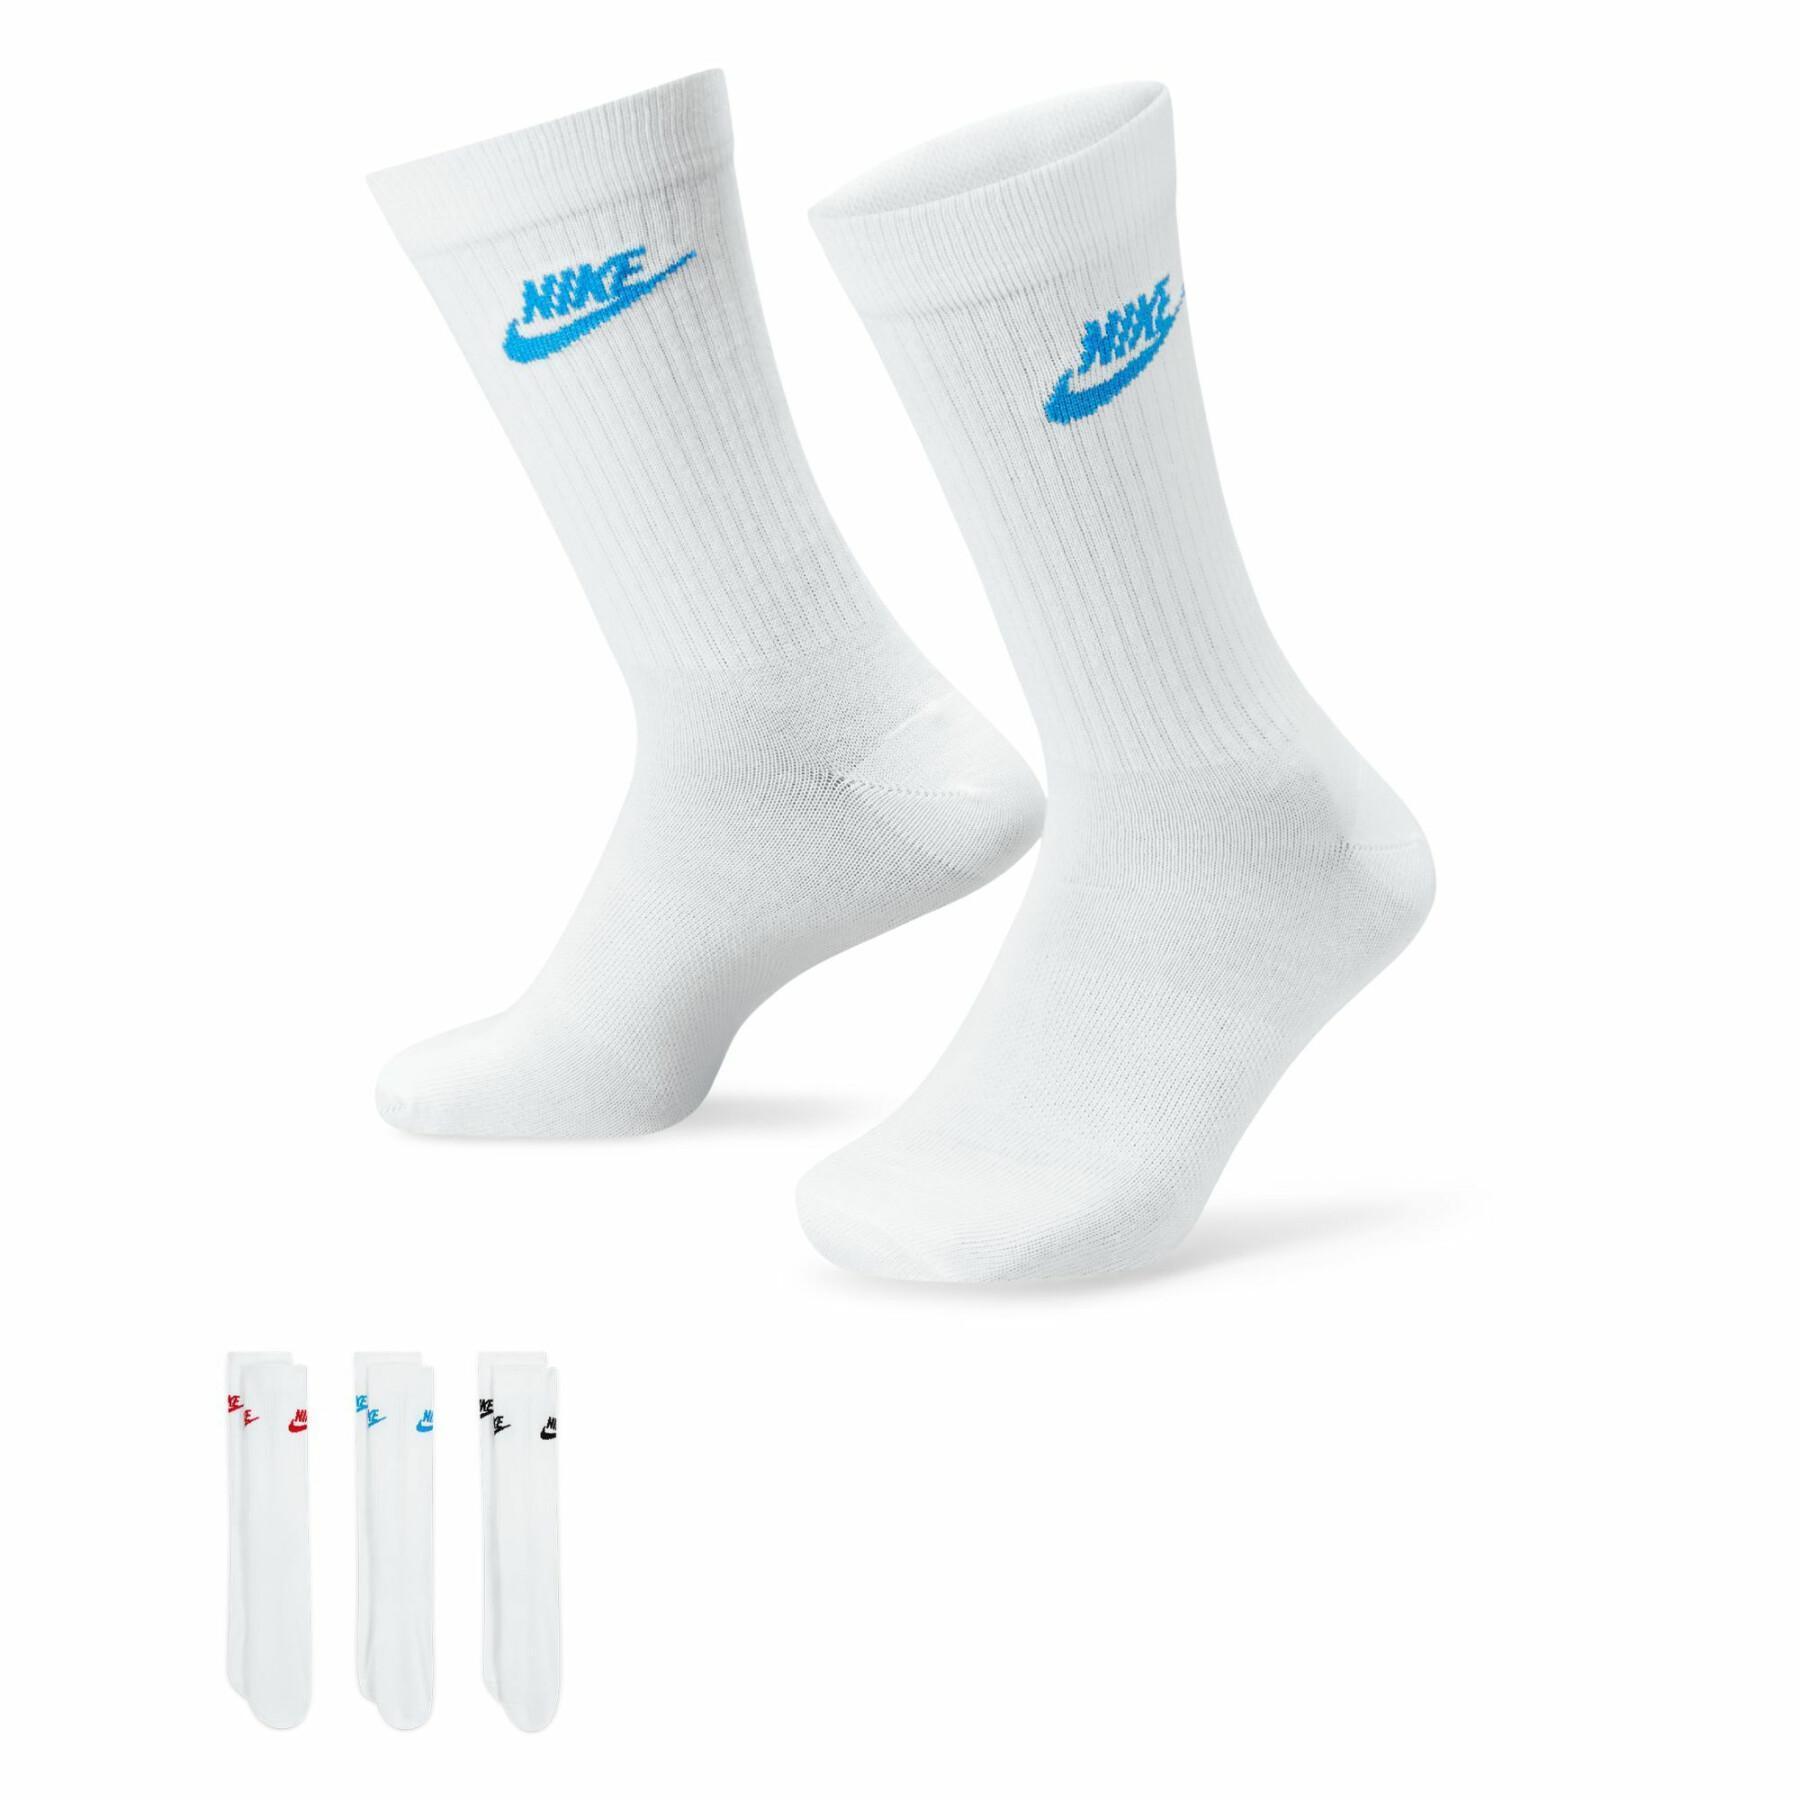 Chaussettes Nike nsw everyday essential - Chaussettes - Vêtements - Homme